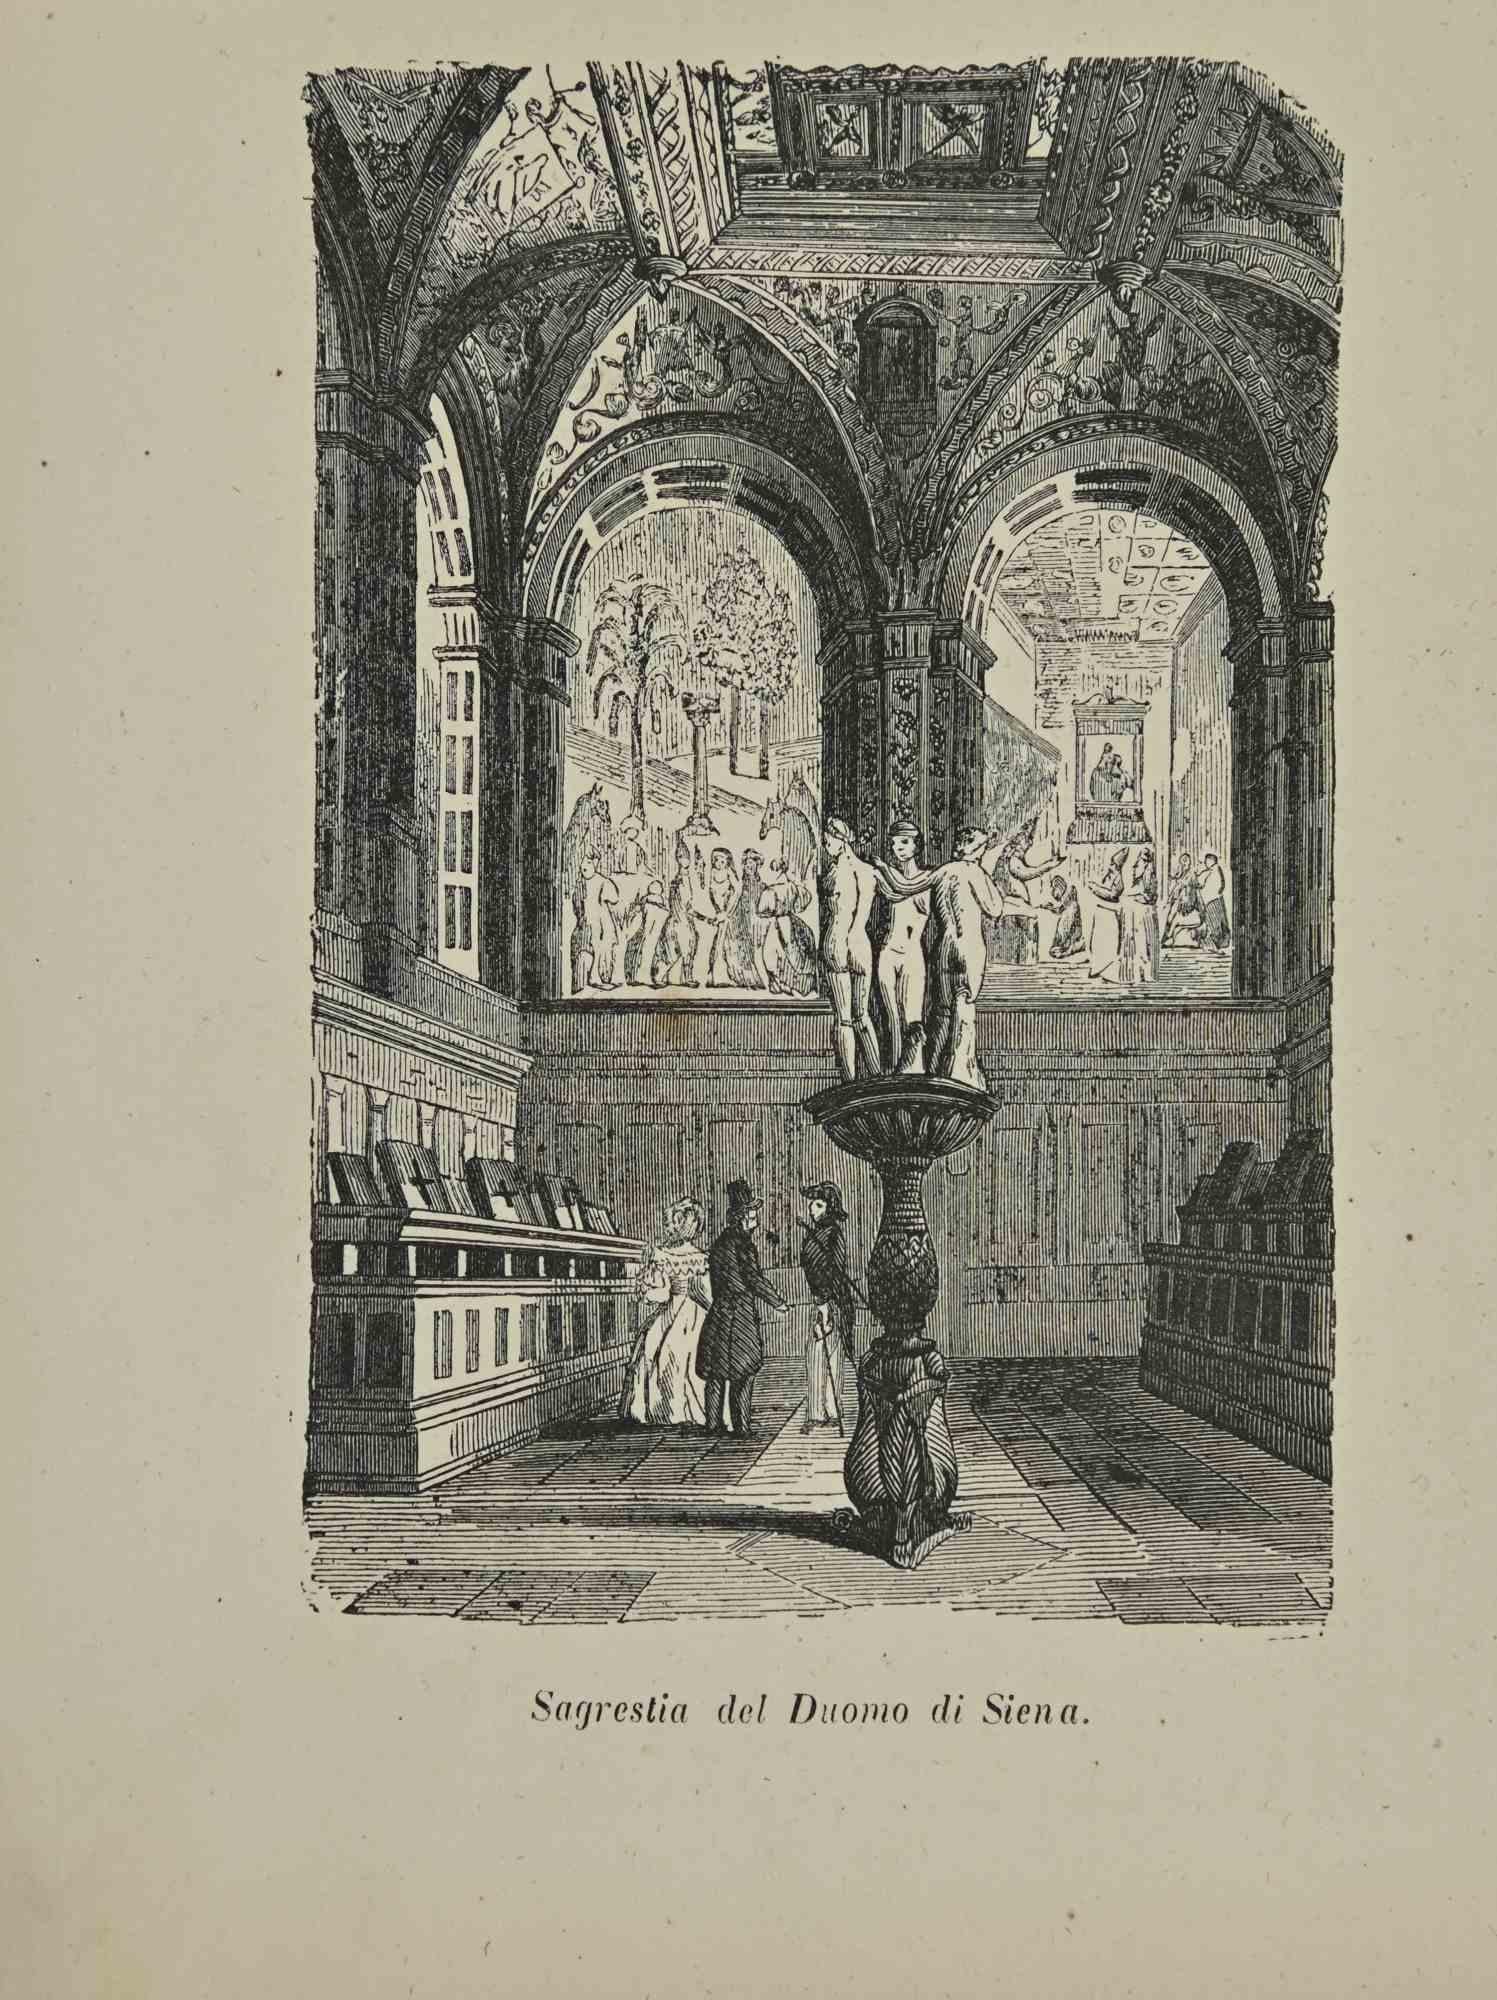 Uses and Customs - Sacristy of the Cathedral in Siena - Lithograph - 1862